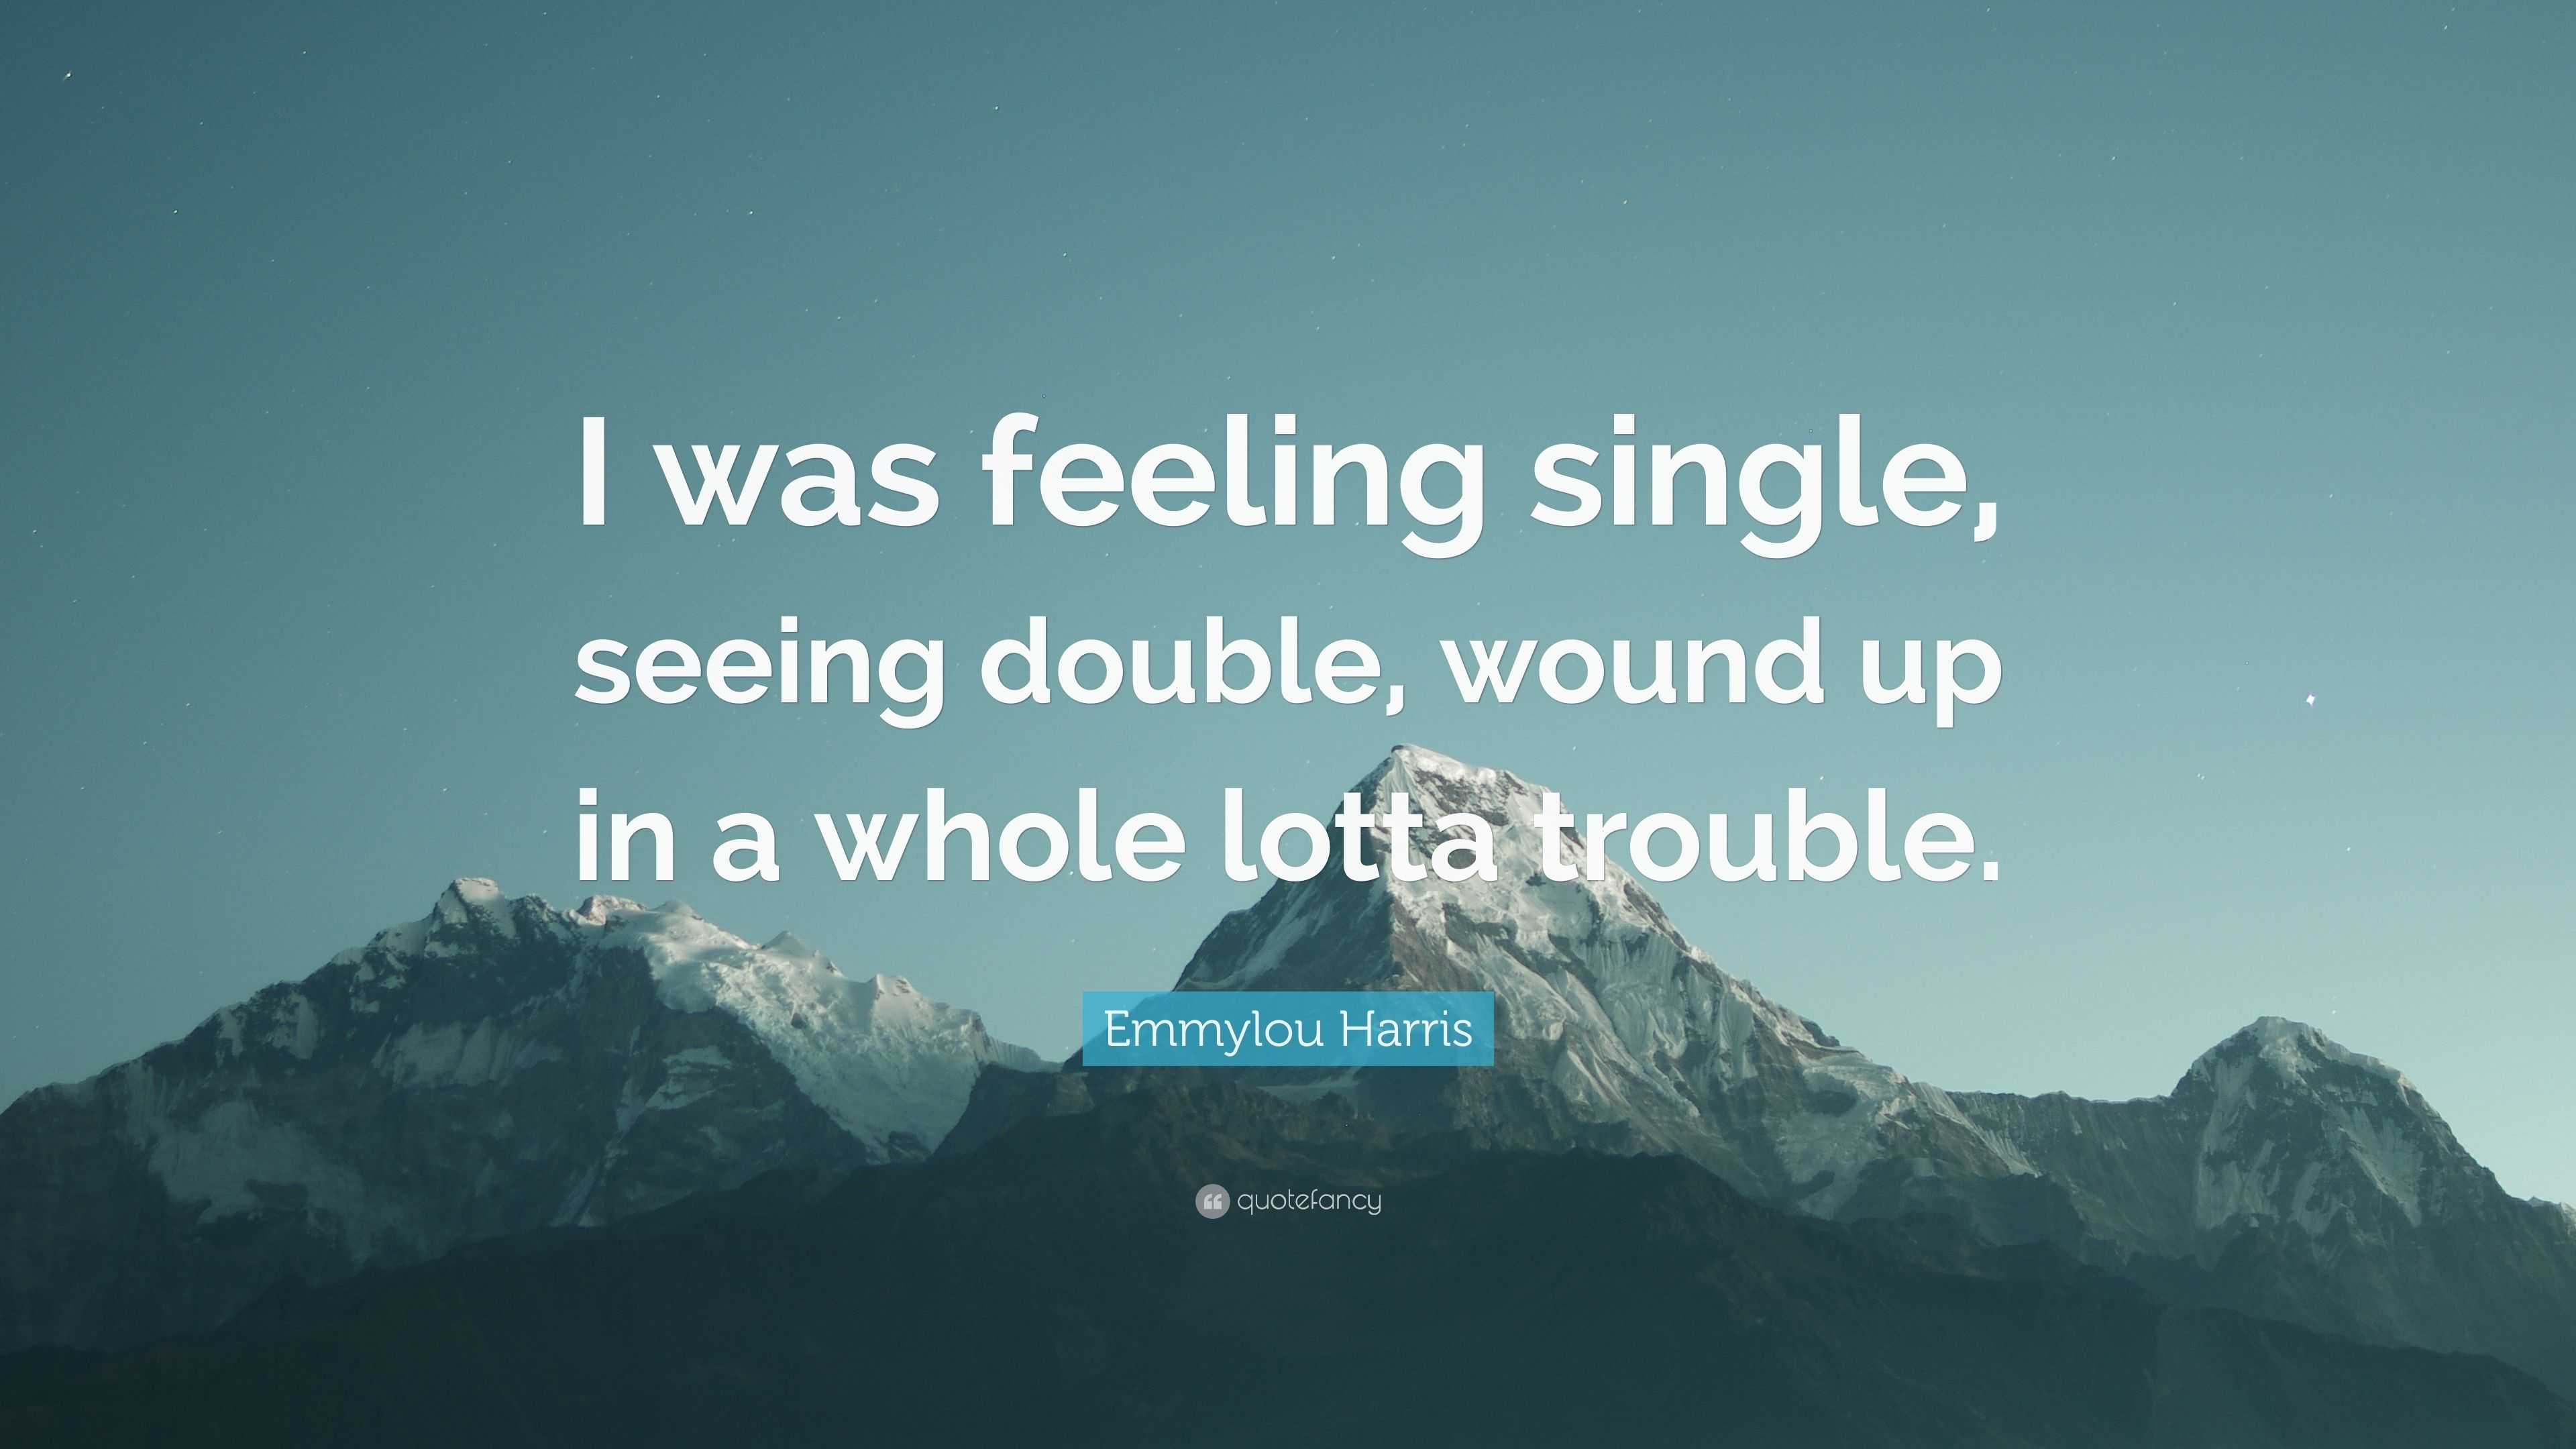 Emmylou Harris Quote “I was feeling single, seeing double, wound up in